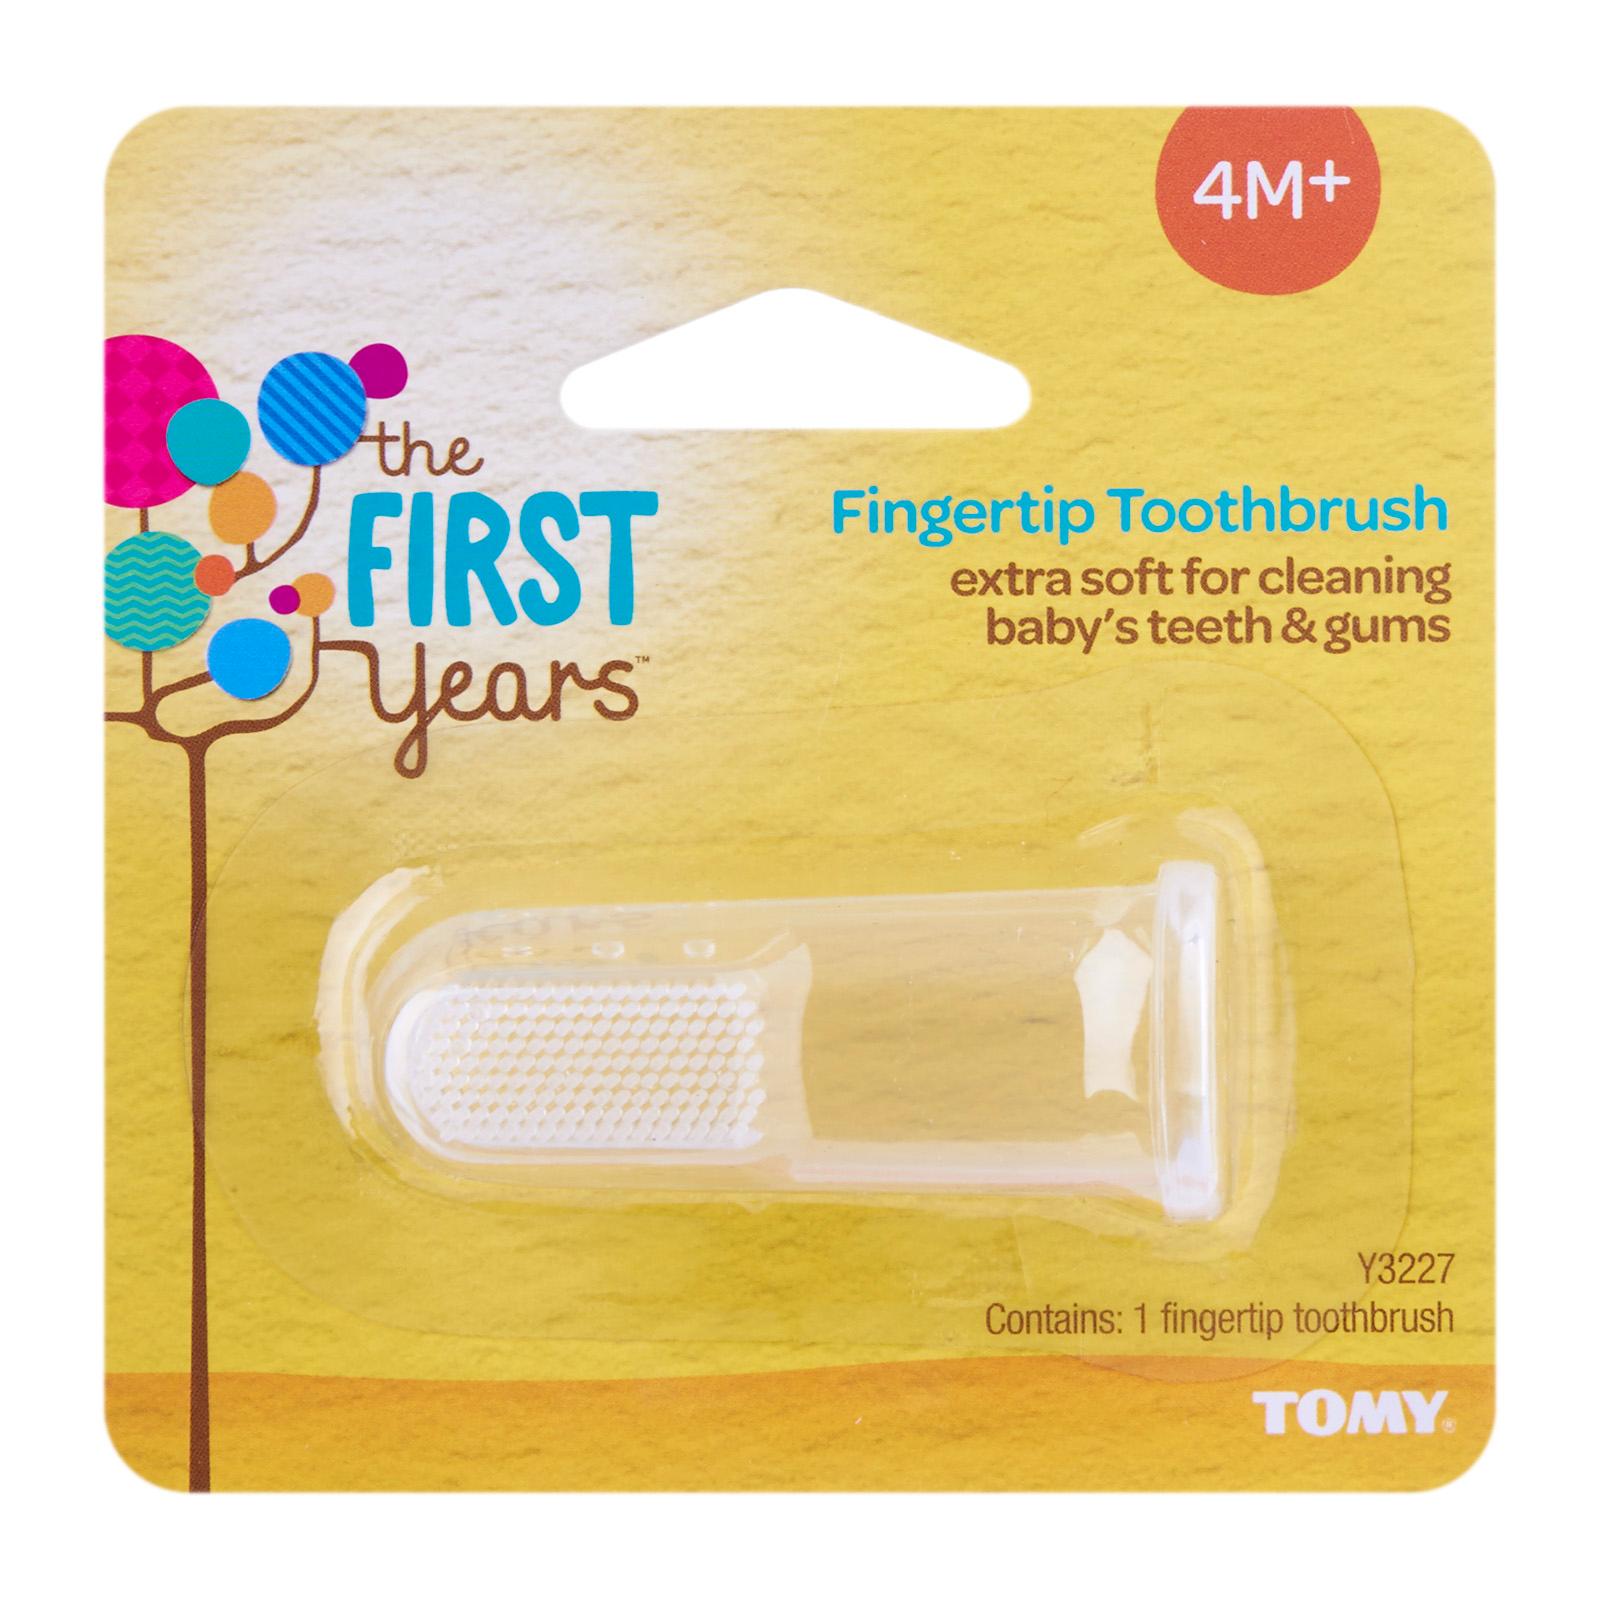 THE FIRST YEARS Fingertip Toothbrush